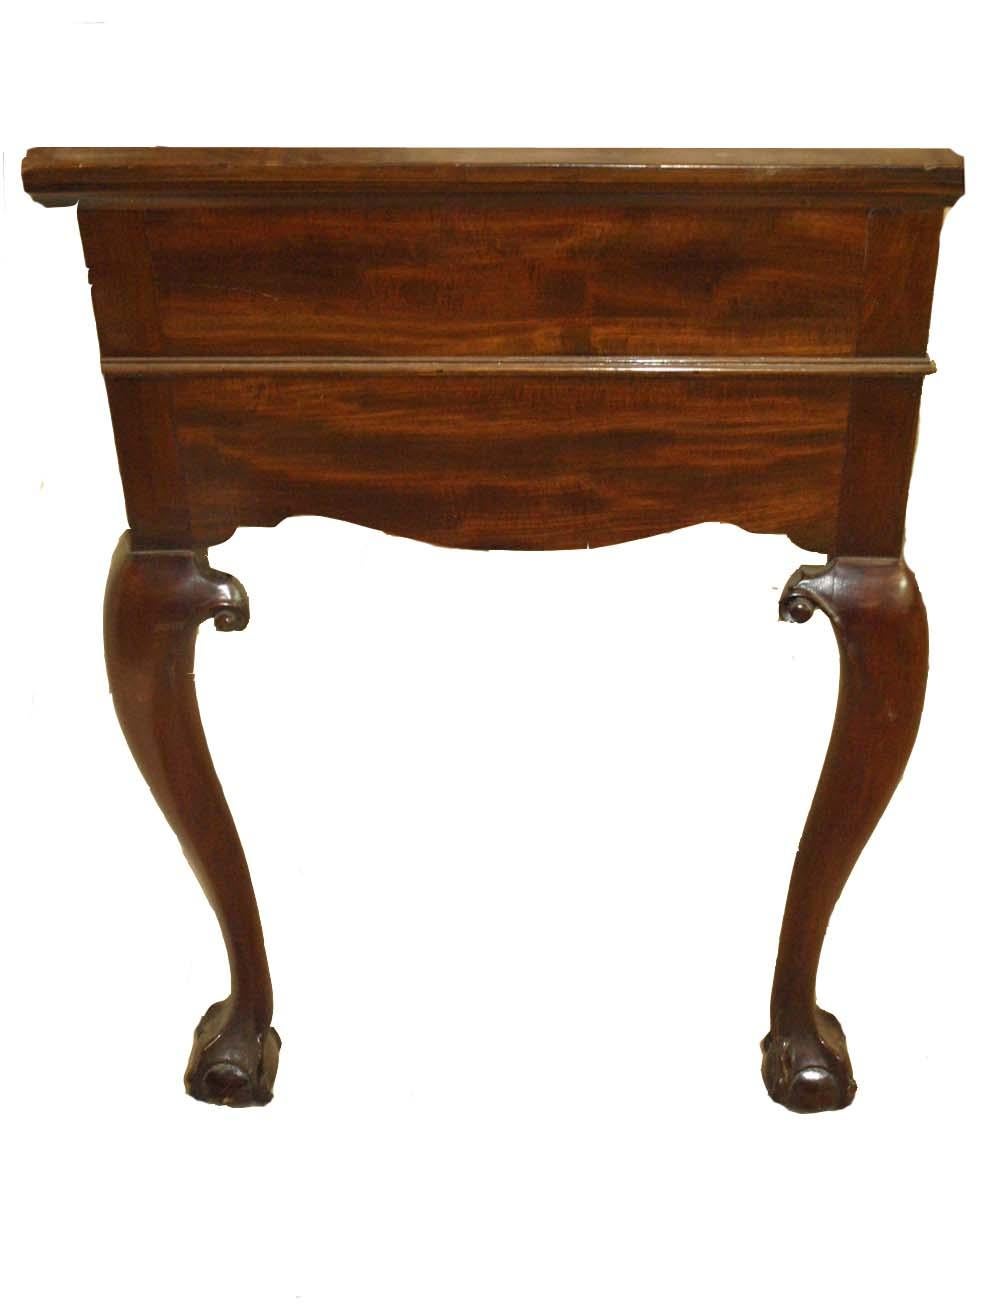 Chippendale style mahogany console with beautifully faded mahogany top, the top two drawers have reeded fronts and original open fretwork brass pulls separated by oval applied carved medallion, below are two additional drawers ( pull out from